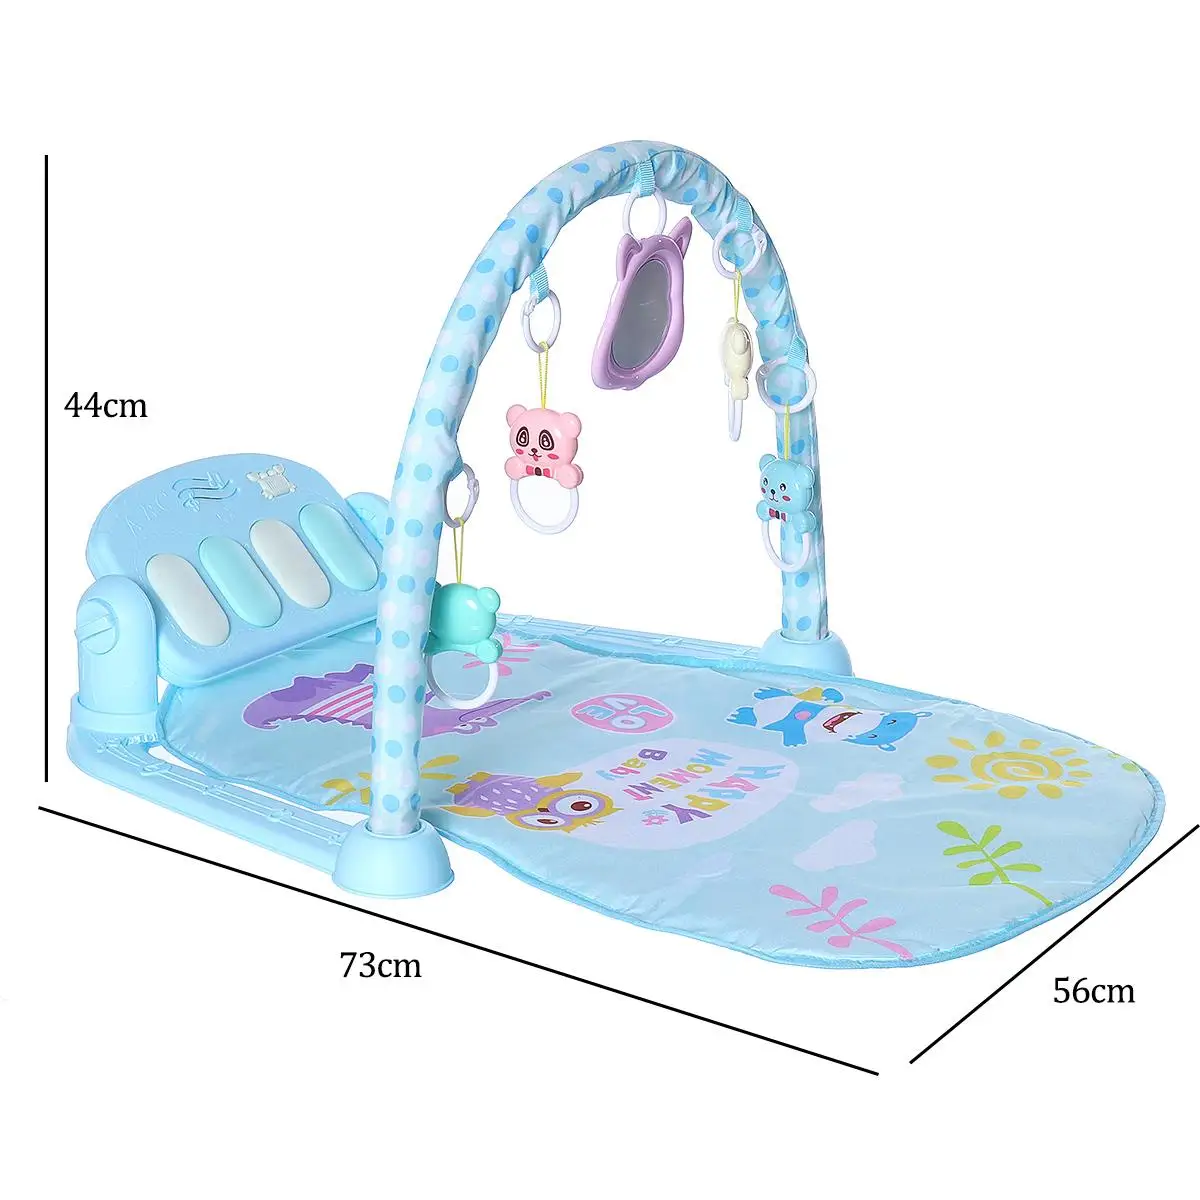 

NEW 3 in 1 Kids Play Mat Baby Gym Toys Soft Lighting Rattles Musical Toys For Babies Educational Toys Play Piano Gym Baby Gifts